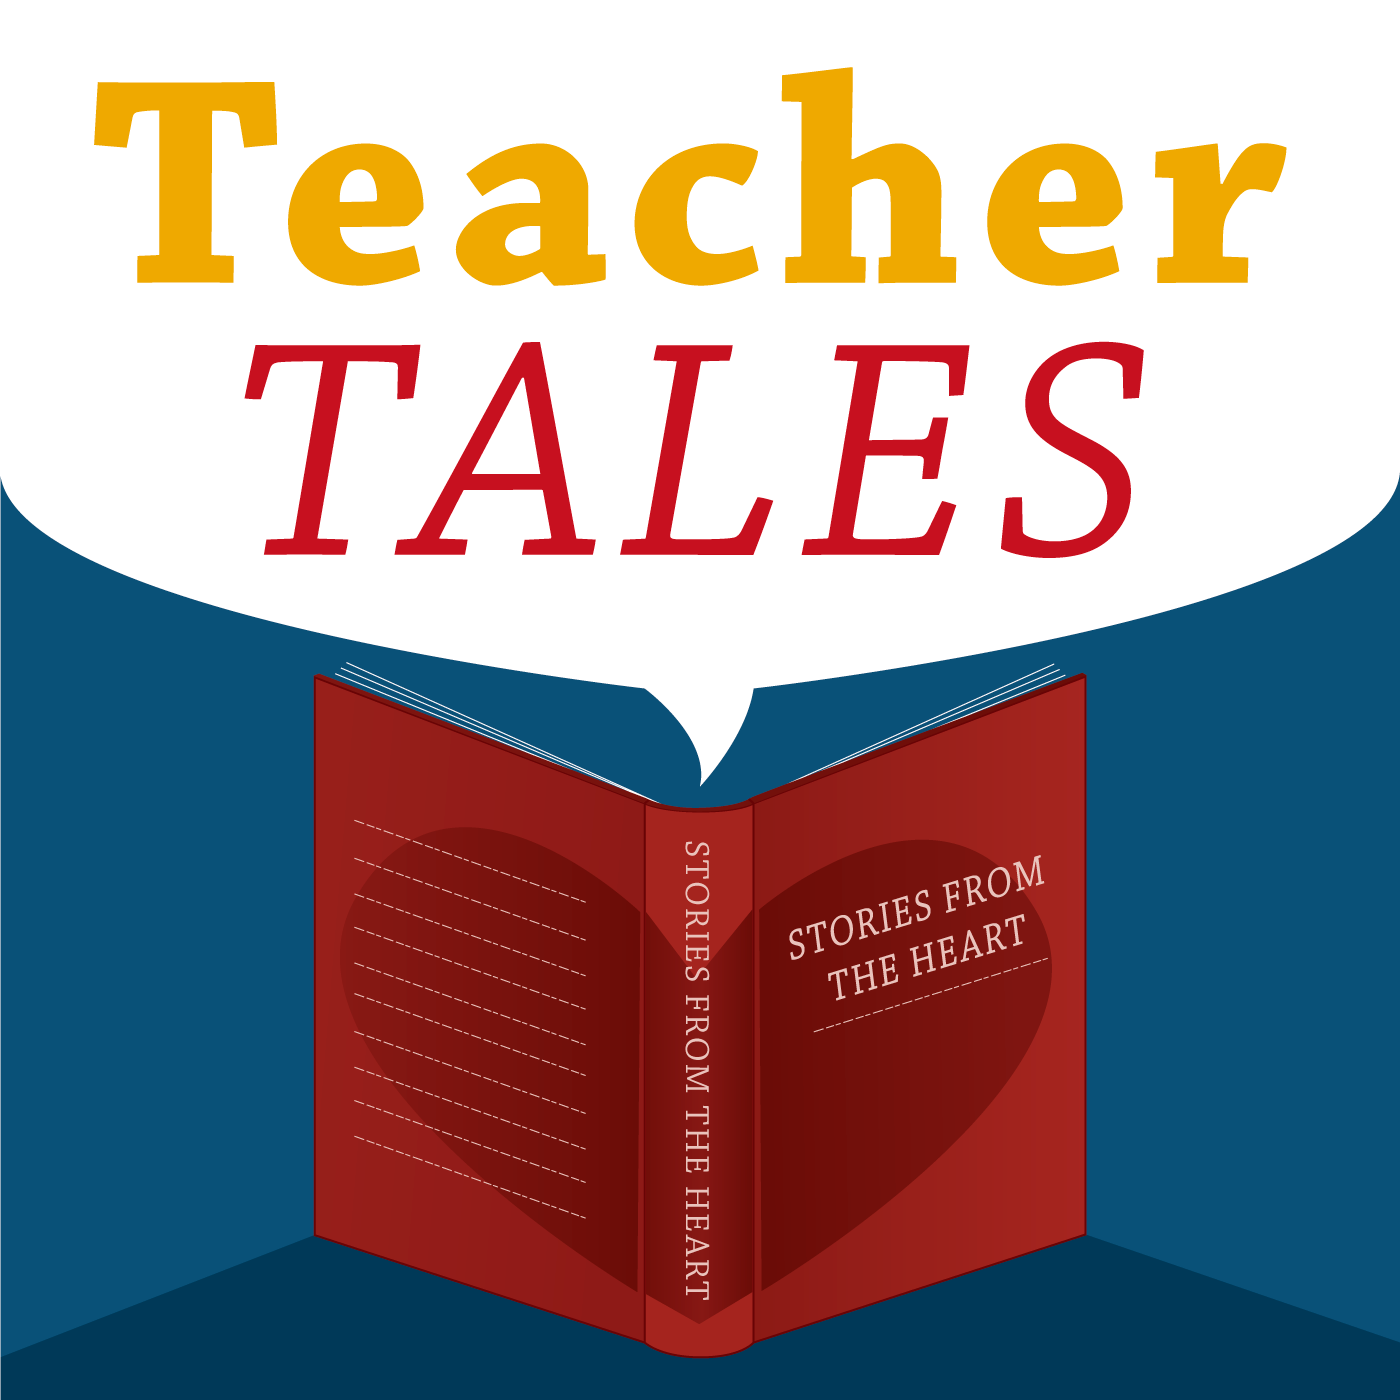 Teacher Tales #41 - Teacher Talents, Seeing with the Heart and Passing It On!: Jennifer(Ivy), French teacher extraordinaire, Award-winning author and PASSionate educator